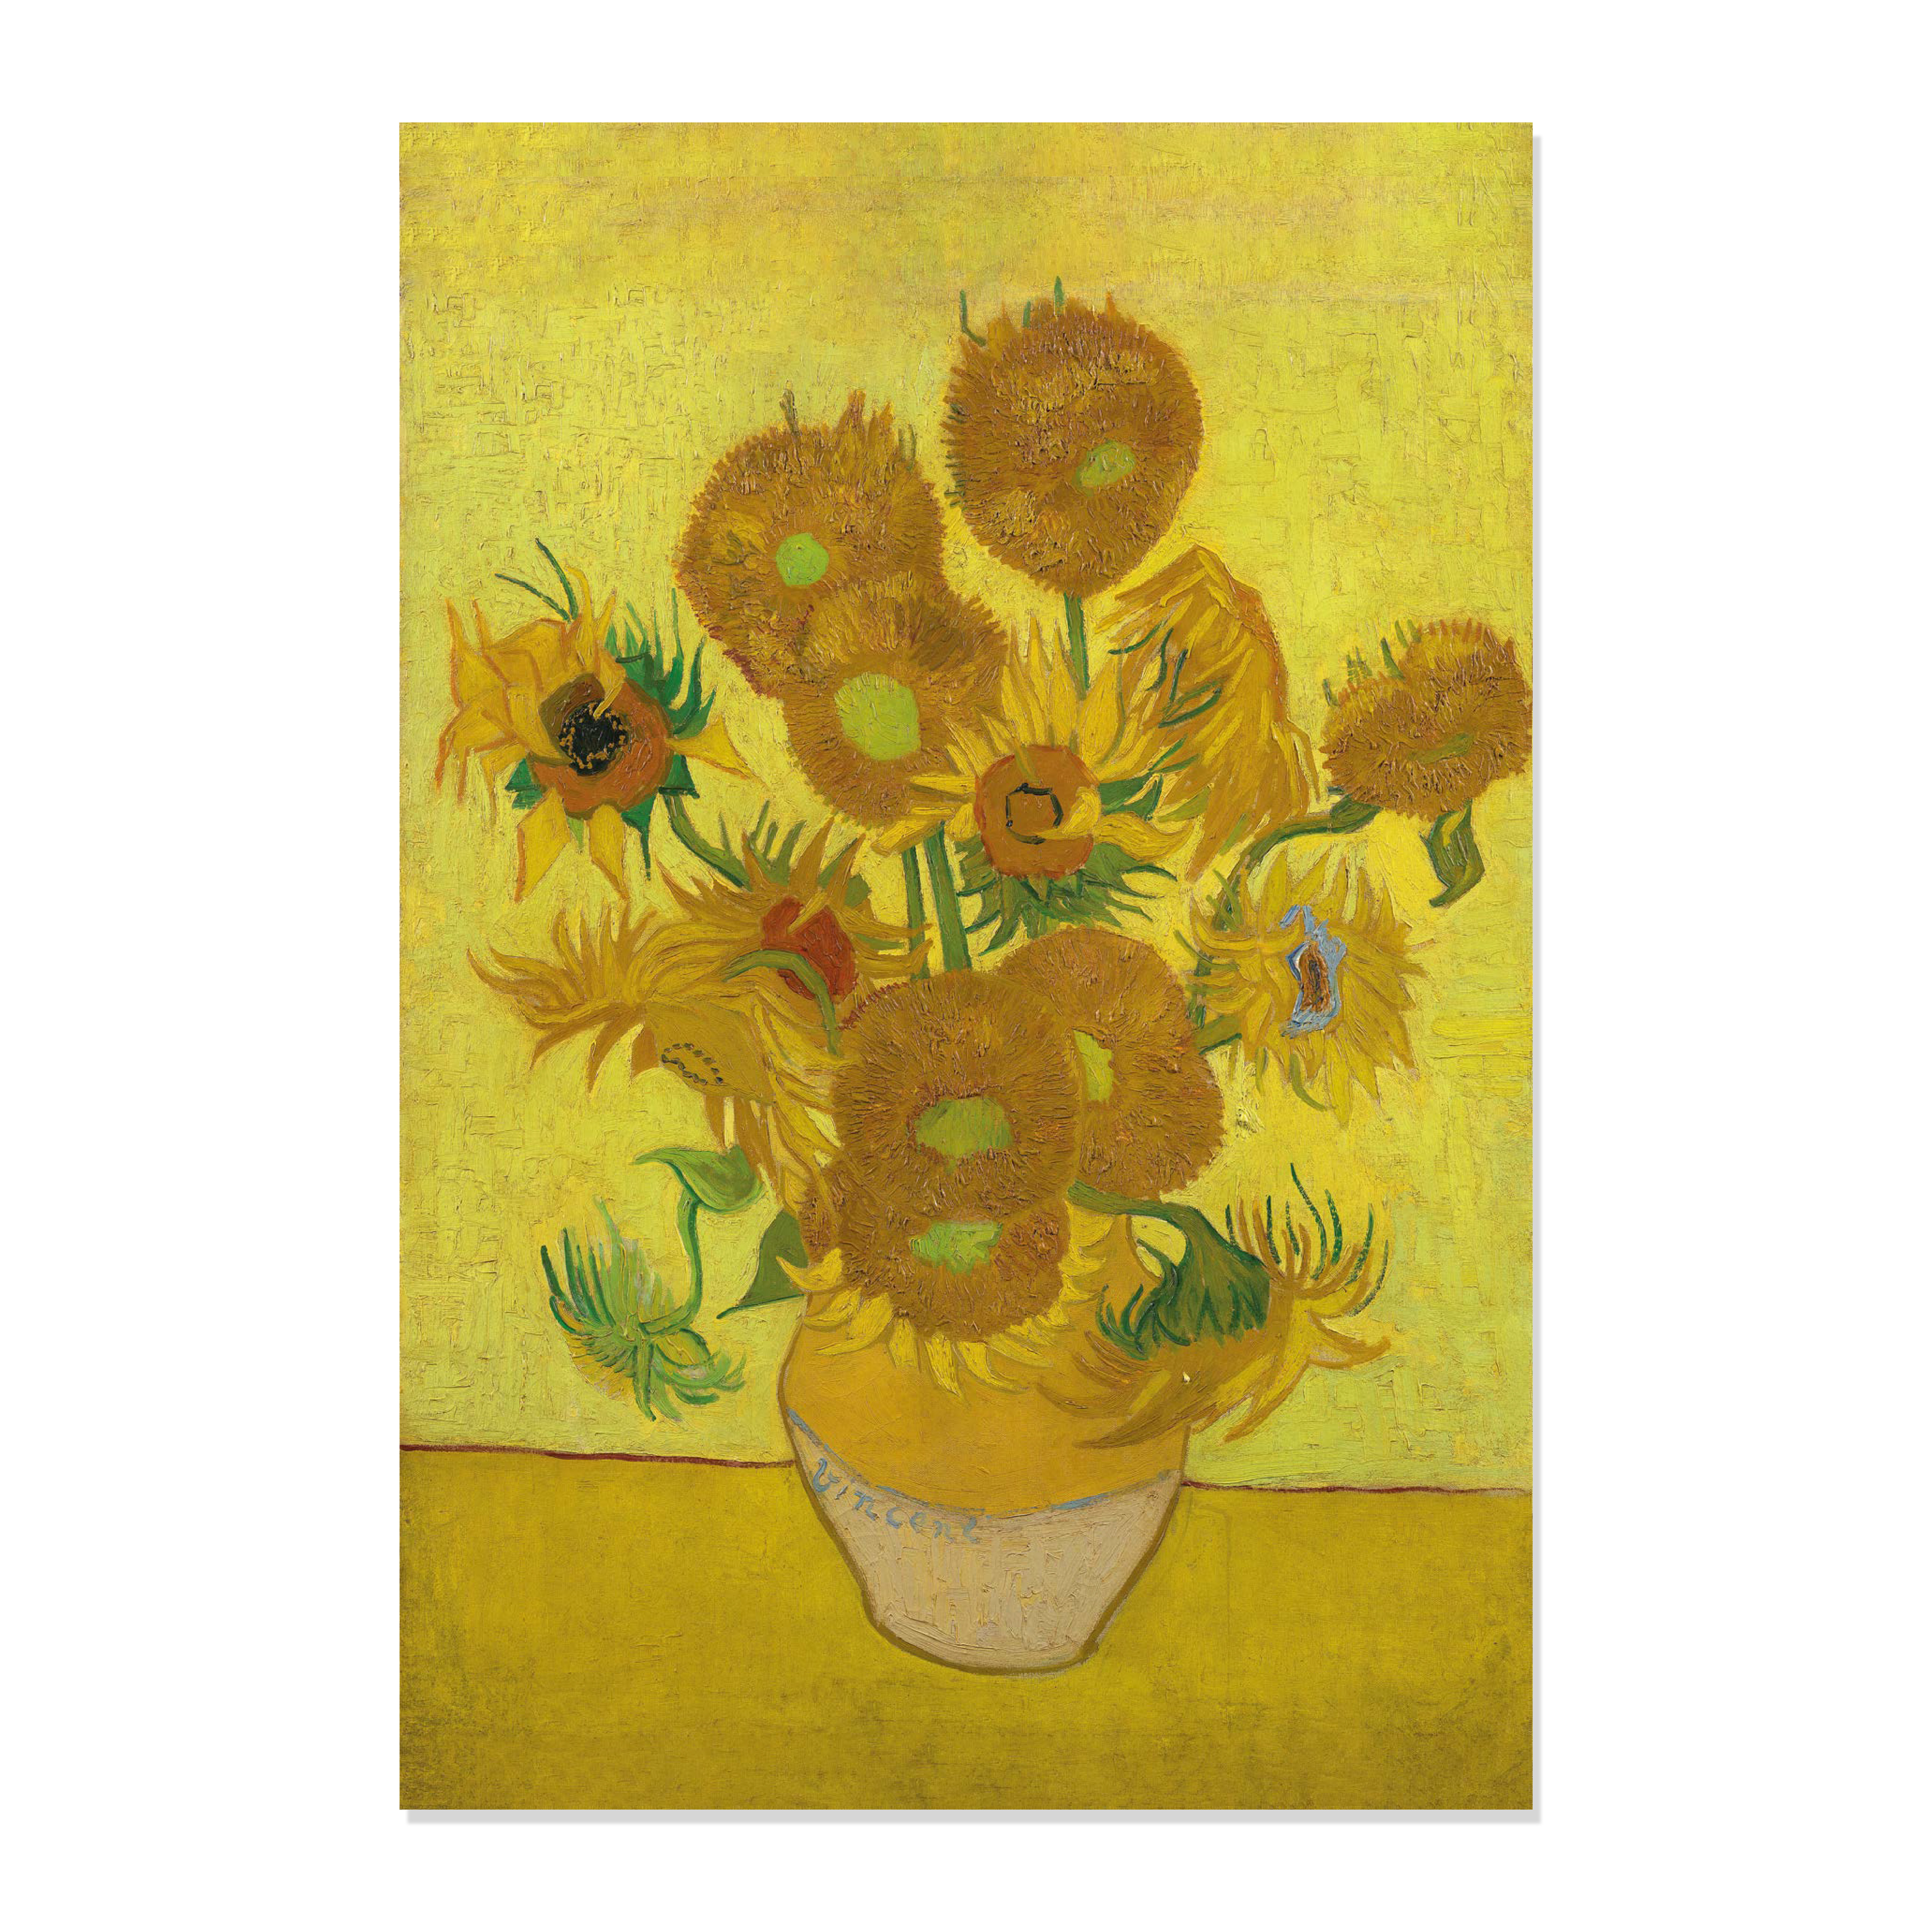 Sunflowers - 12 Blank Note Cards